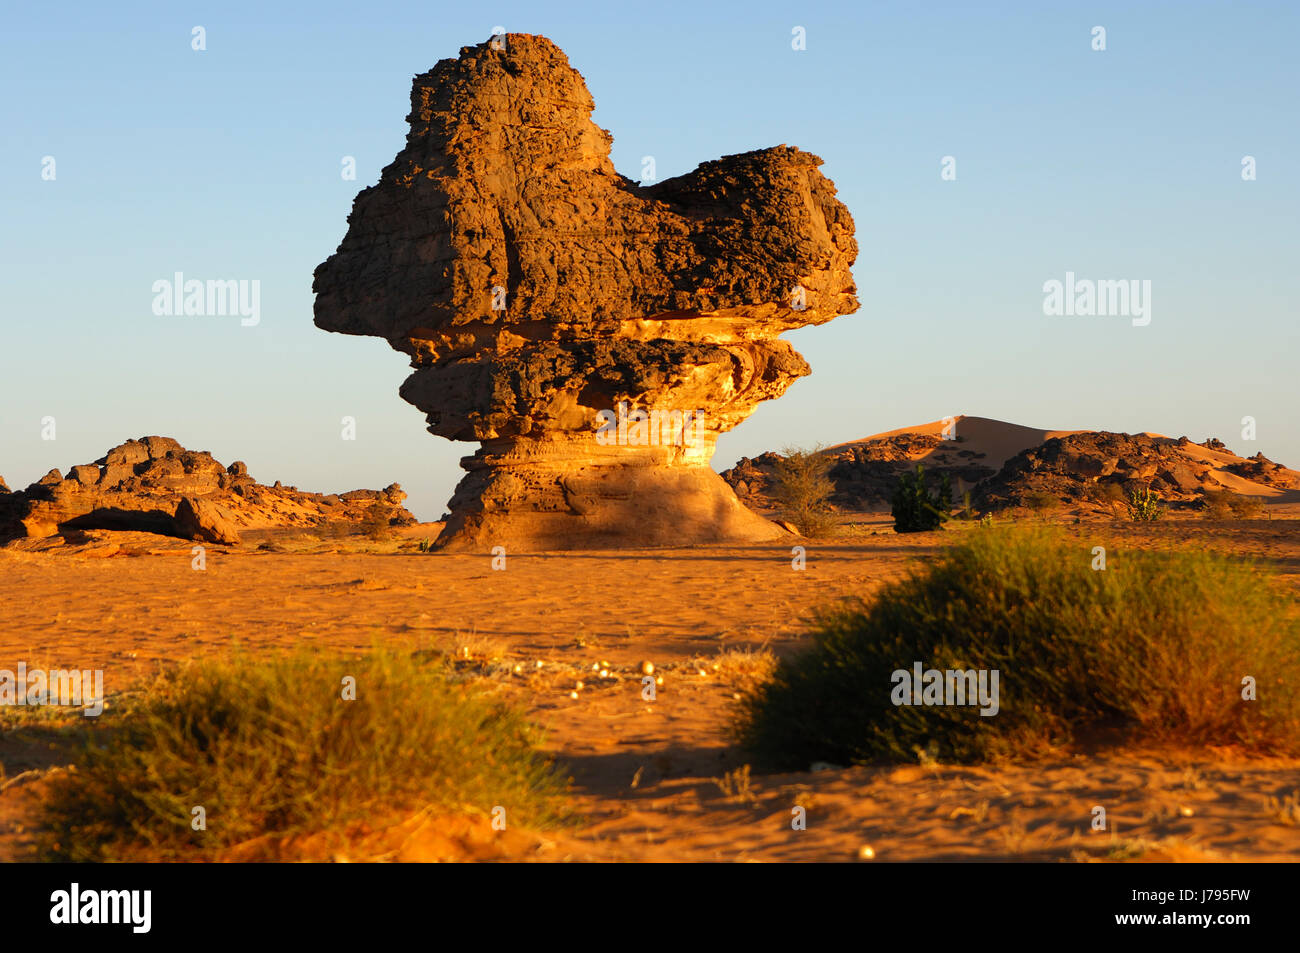 Fungo rock nell Acacus,LIBIA Foto Stock